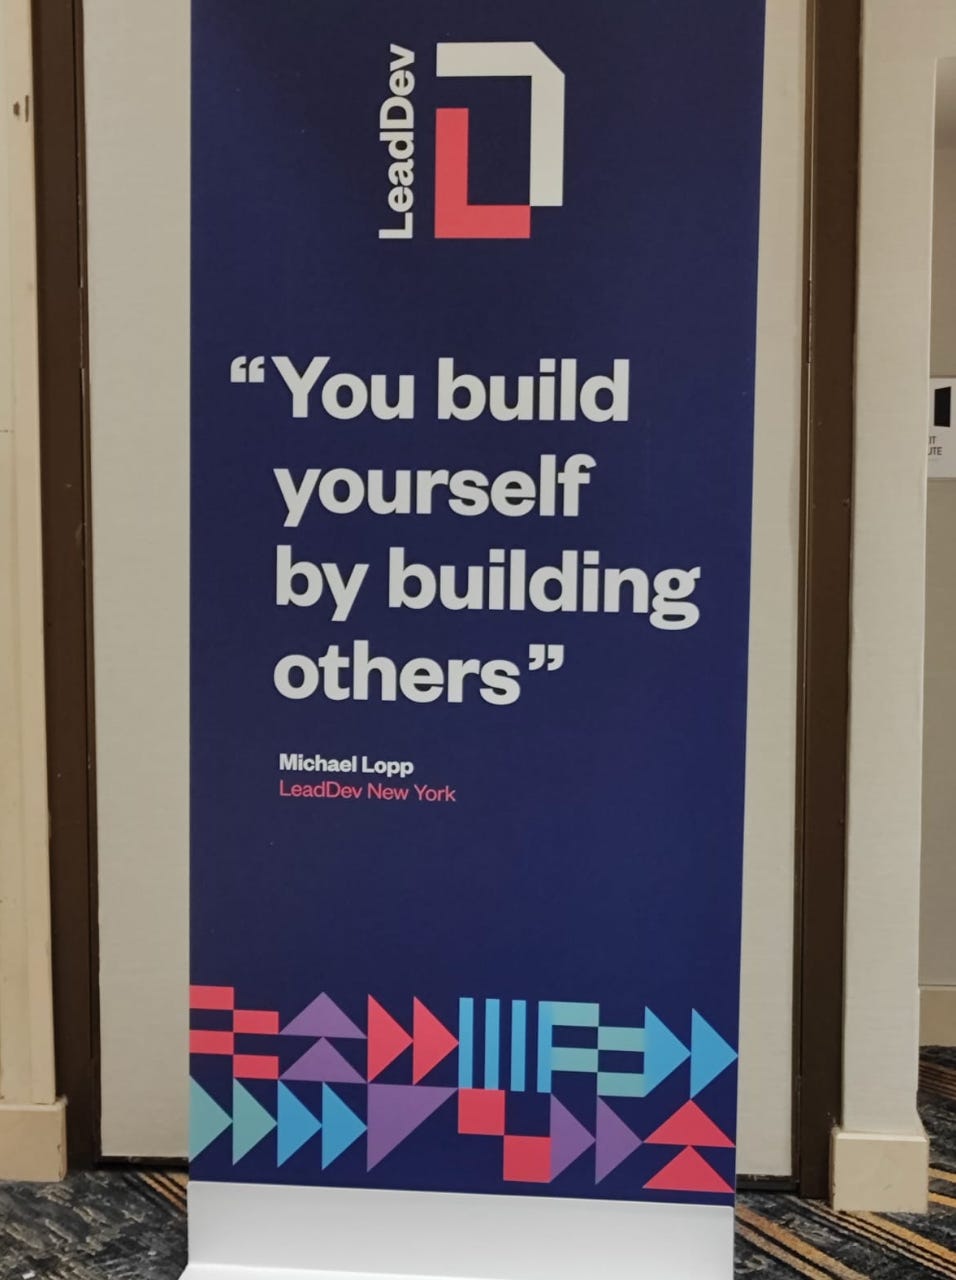 Exhibited poster a quote "You build yourself by building others" by Michael Loop from LeadDev New York.